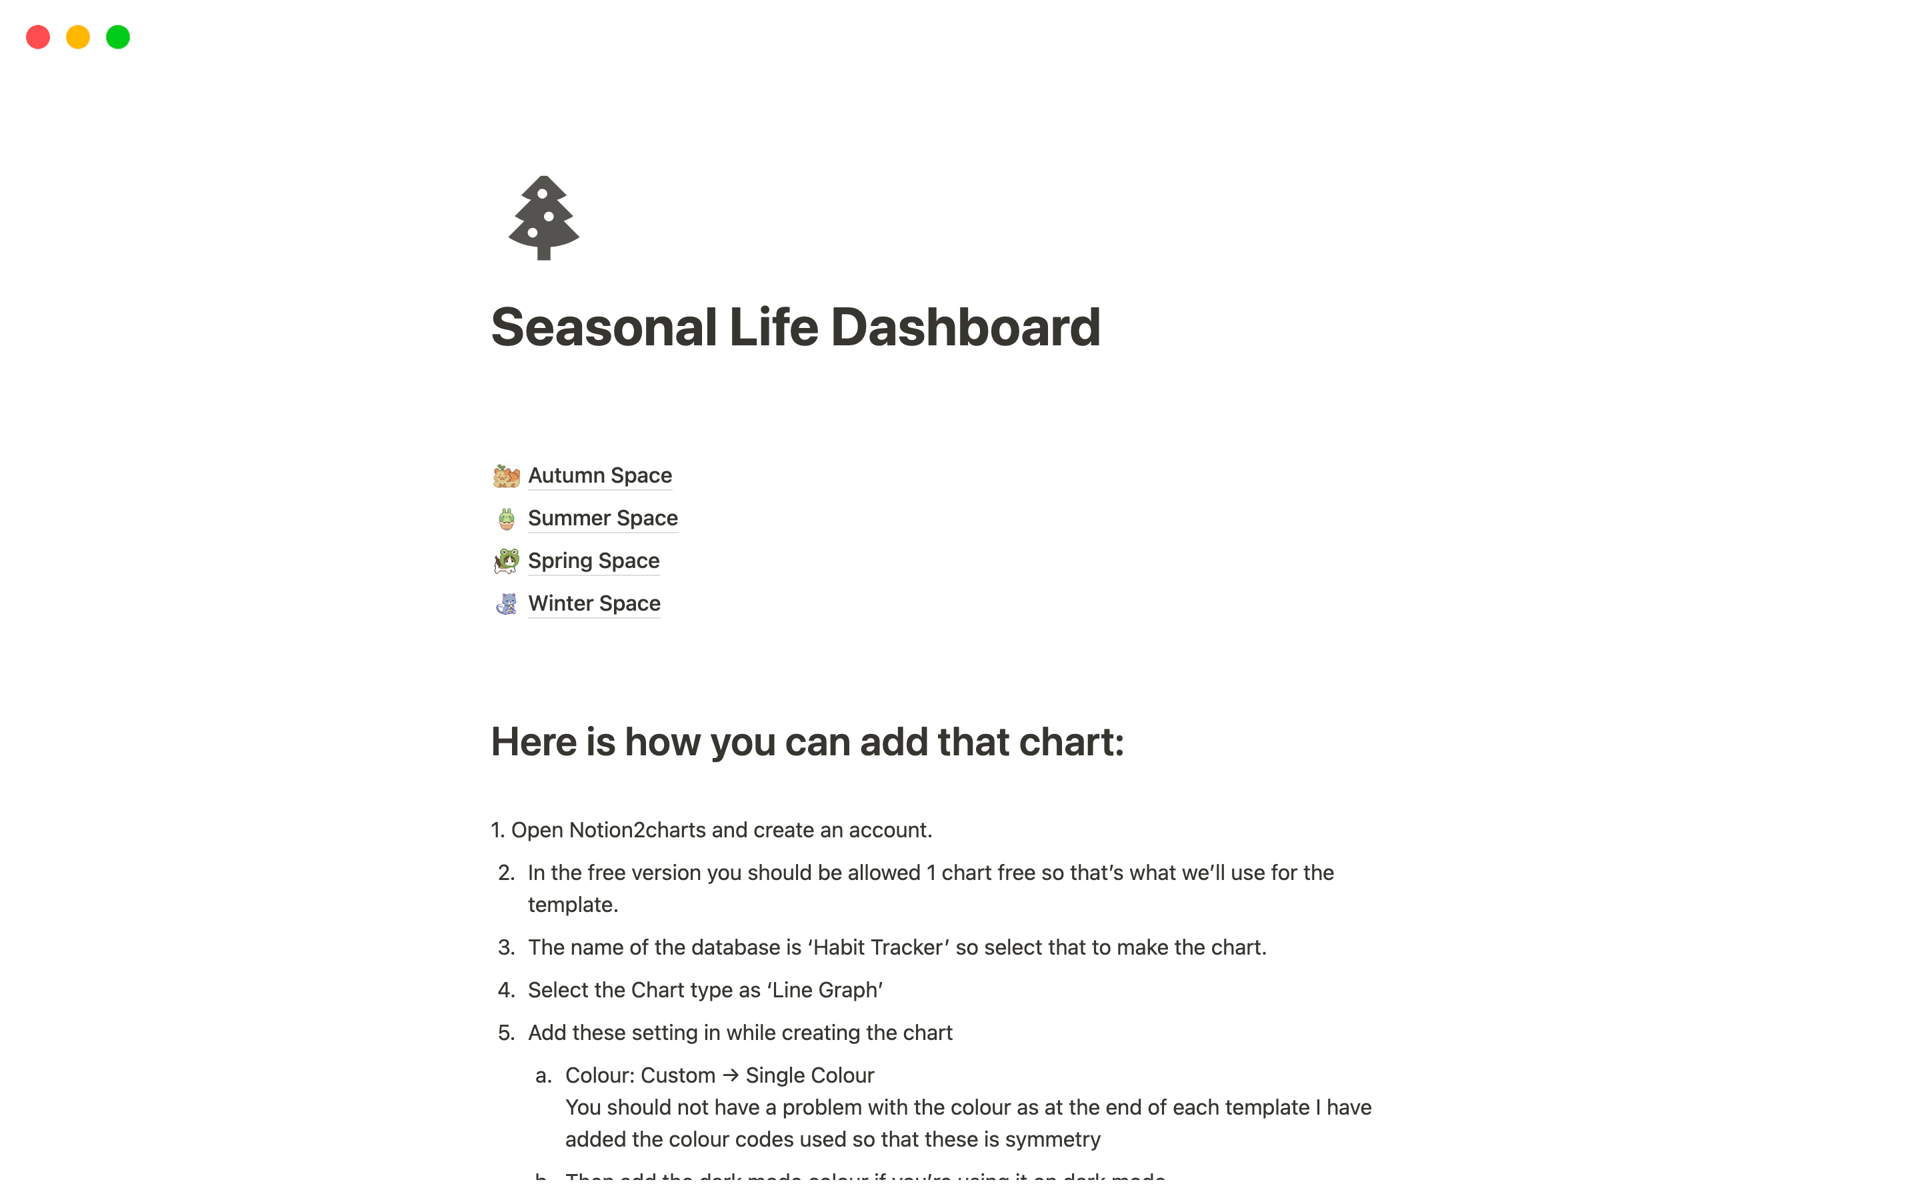 Let your dashboards change as the seasons do. 